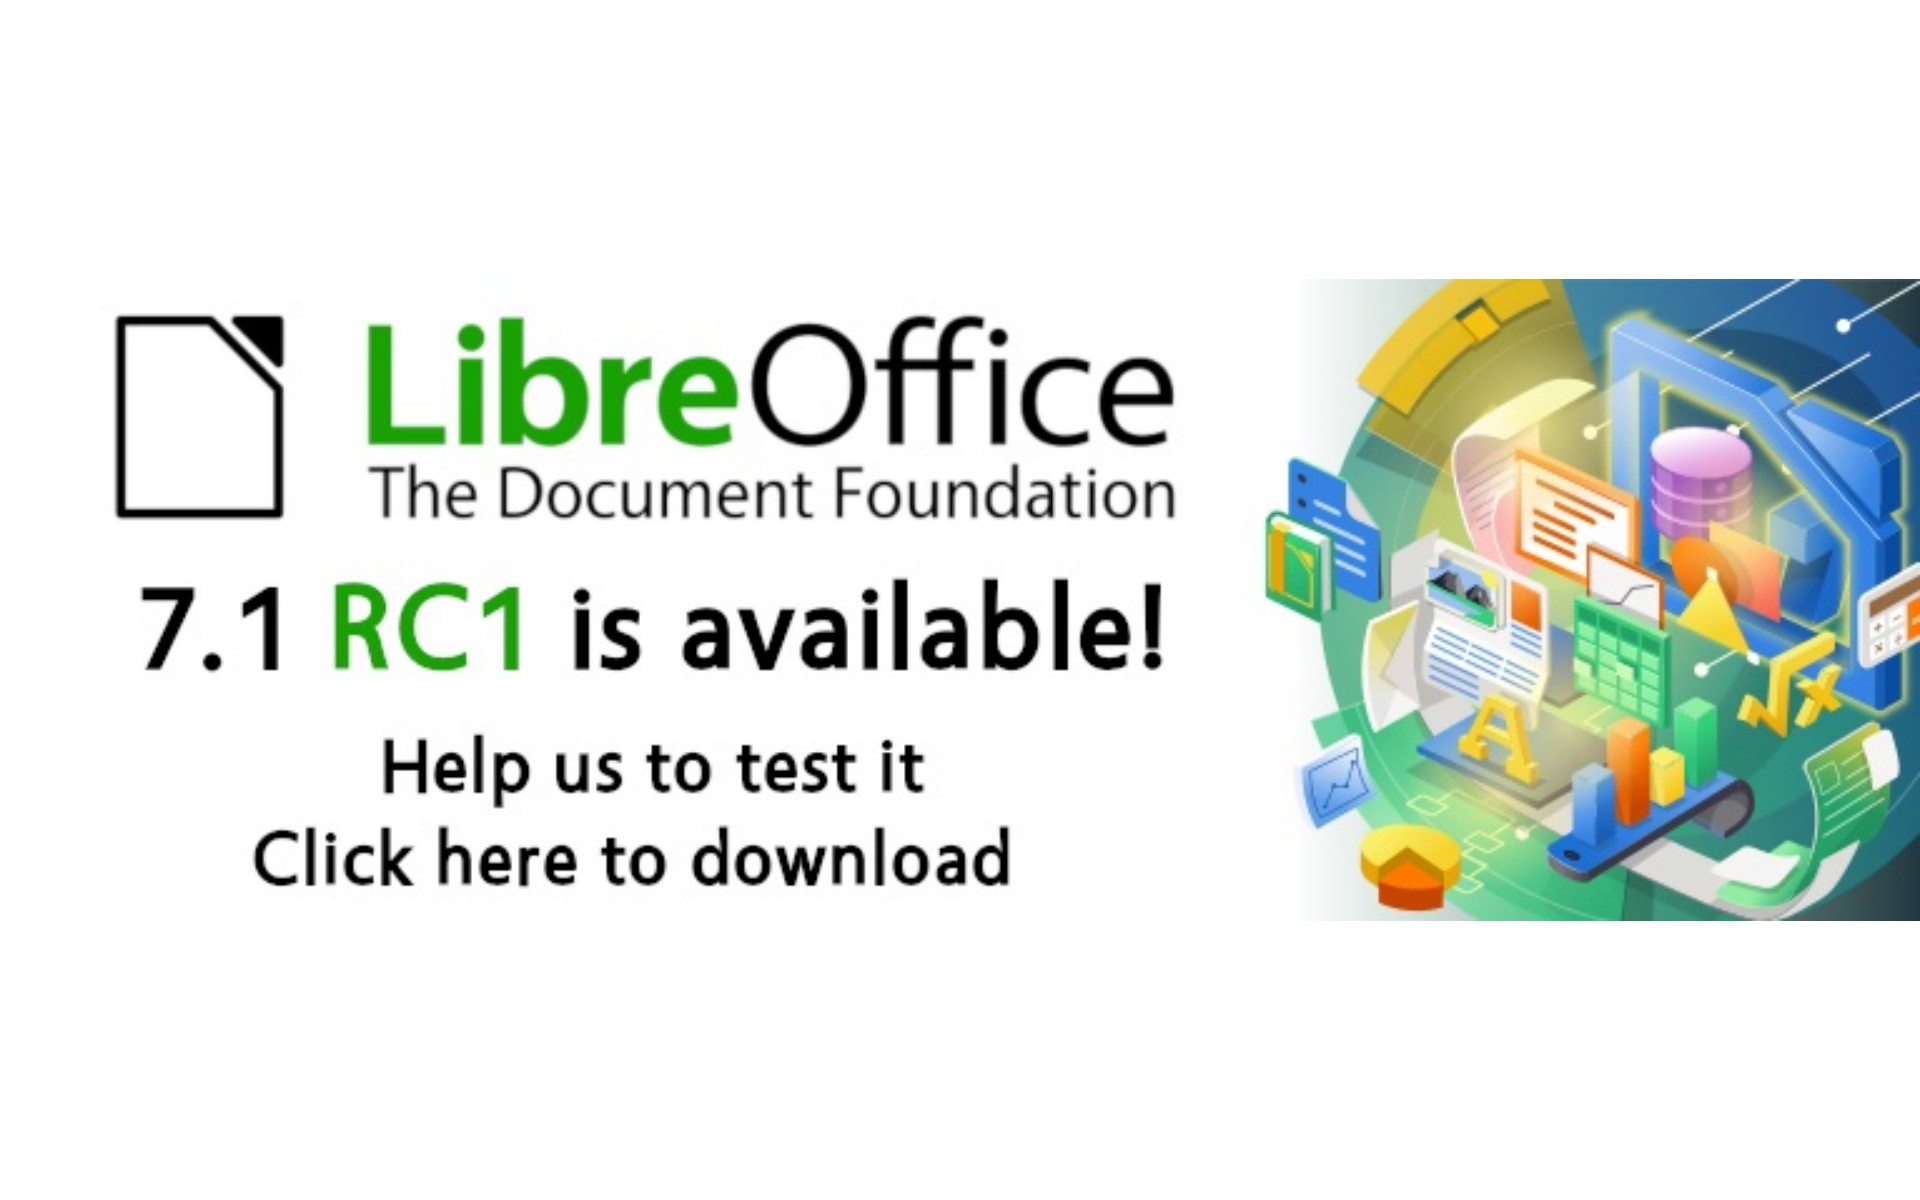 LibreOffice 7.1 Release Candidate Ready for Testing Ahead of Final Release in Early February